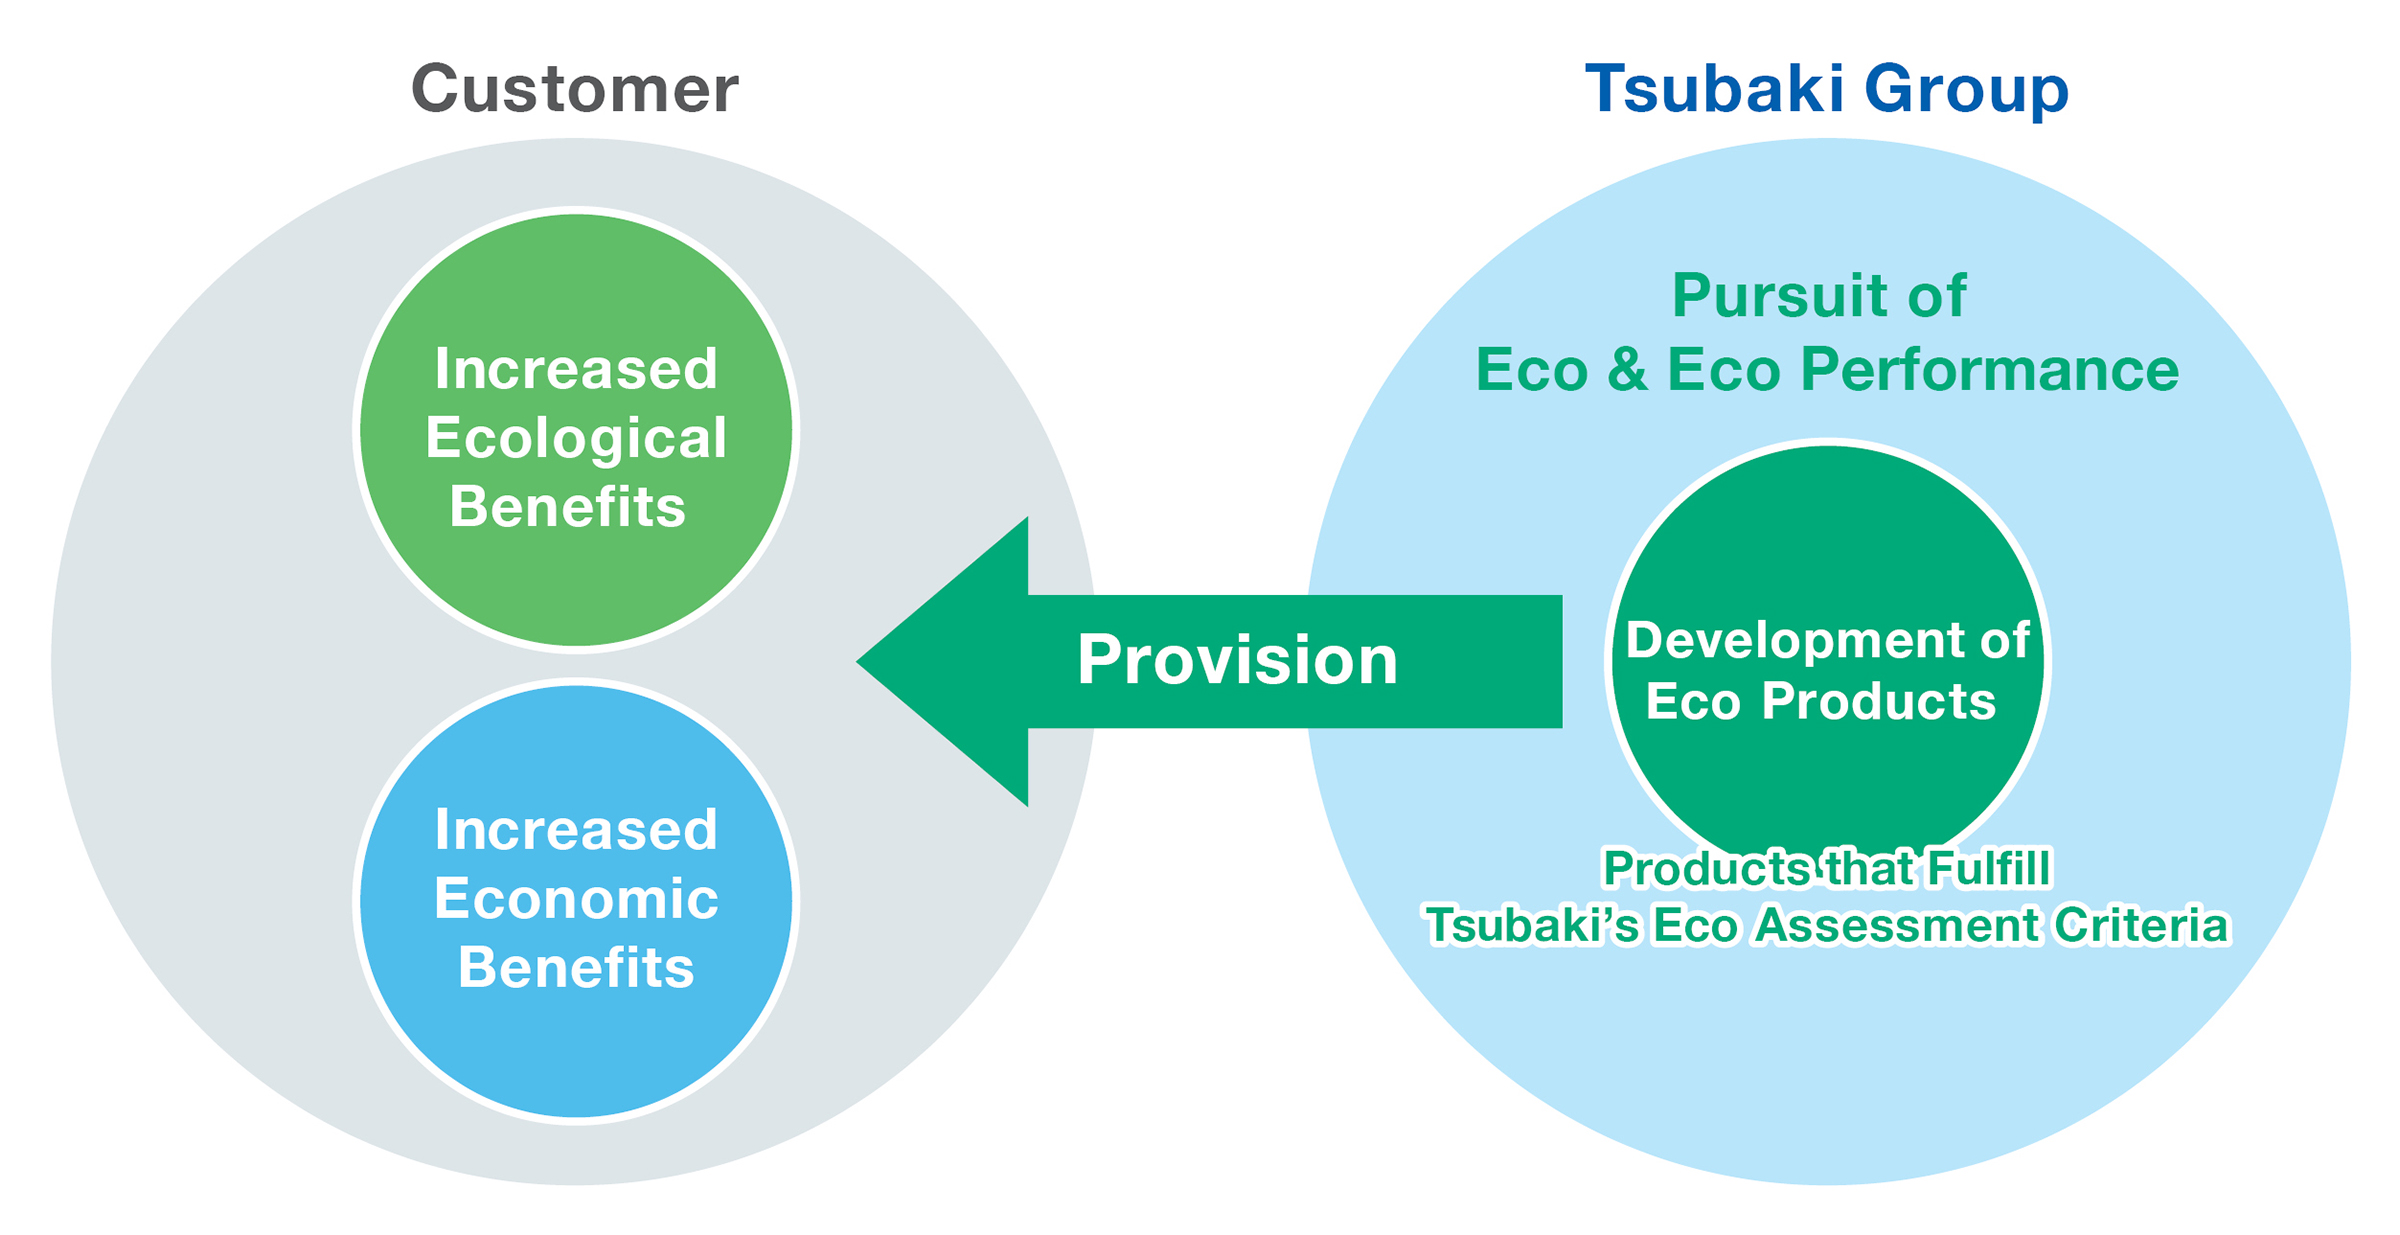 Products developed as part of Tsubaki’s new Eco & Eco philosophy (Ecology and Economy) promise to reduce environmental burden for customers.